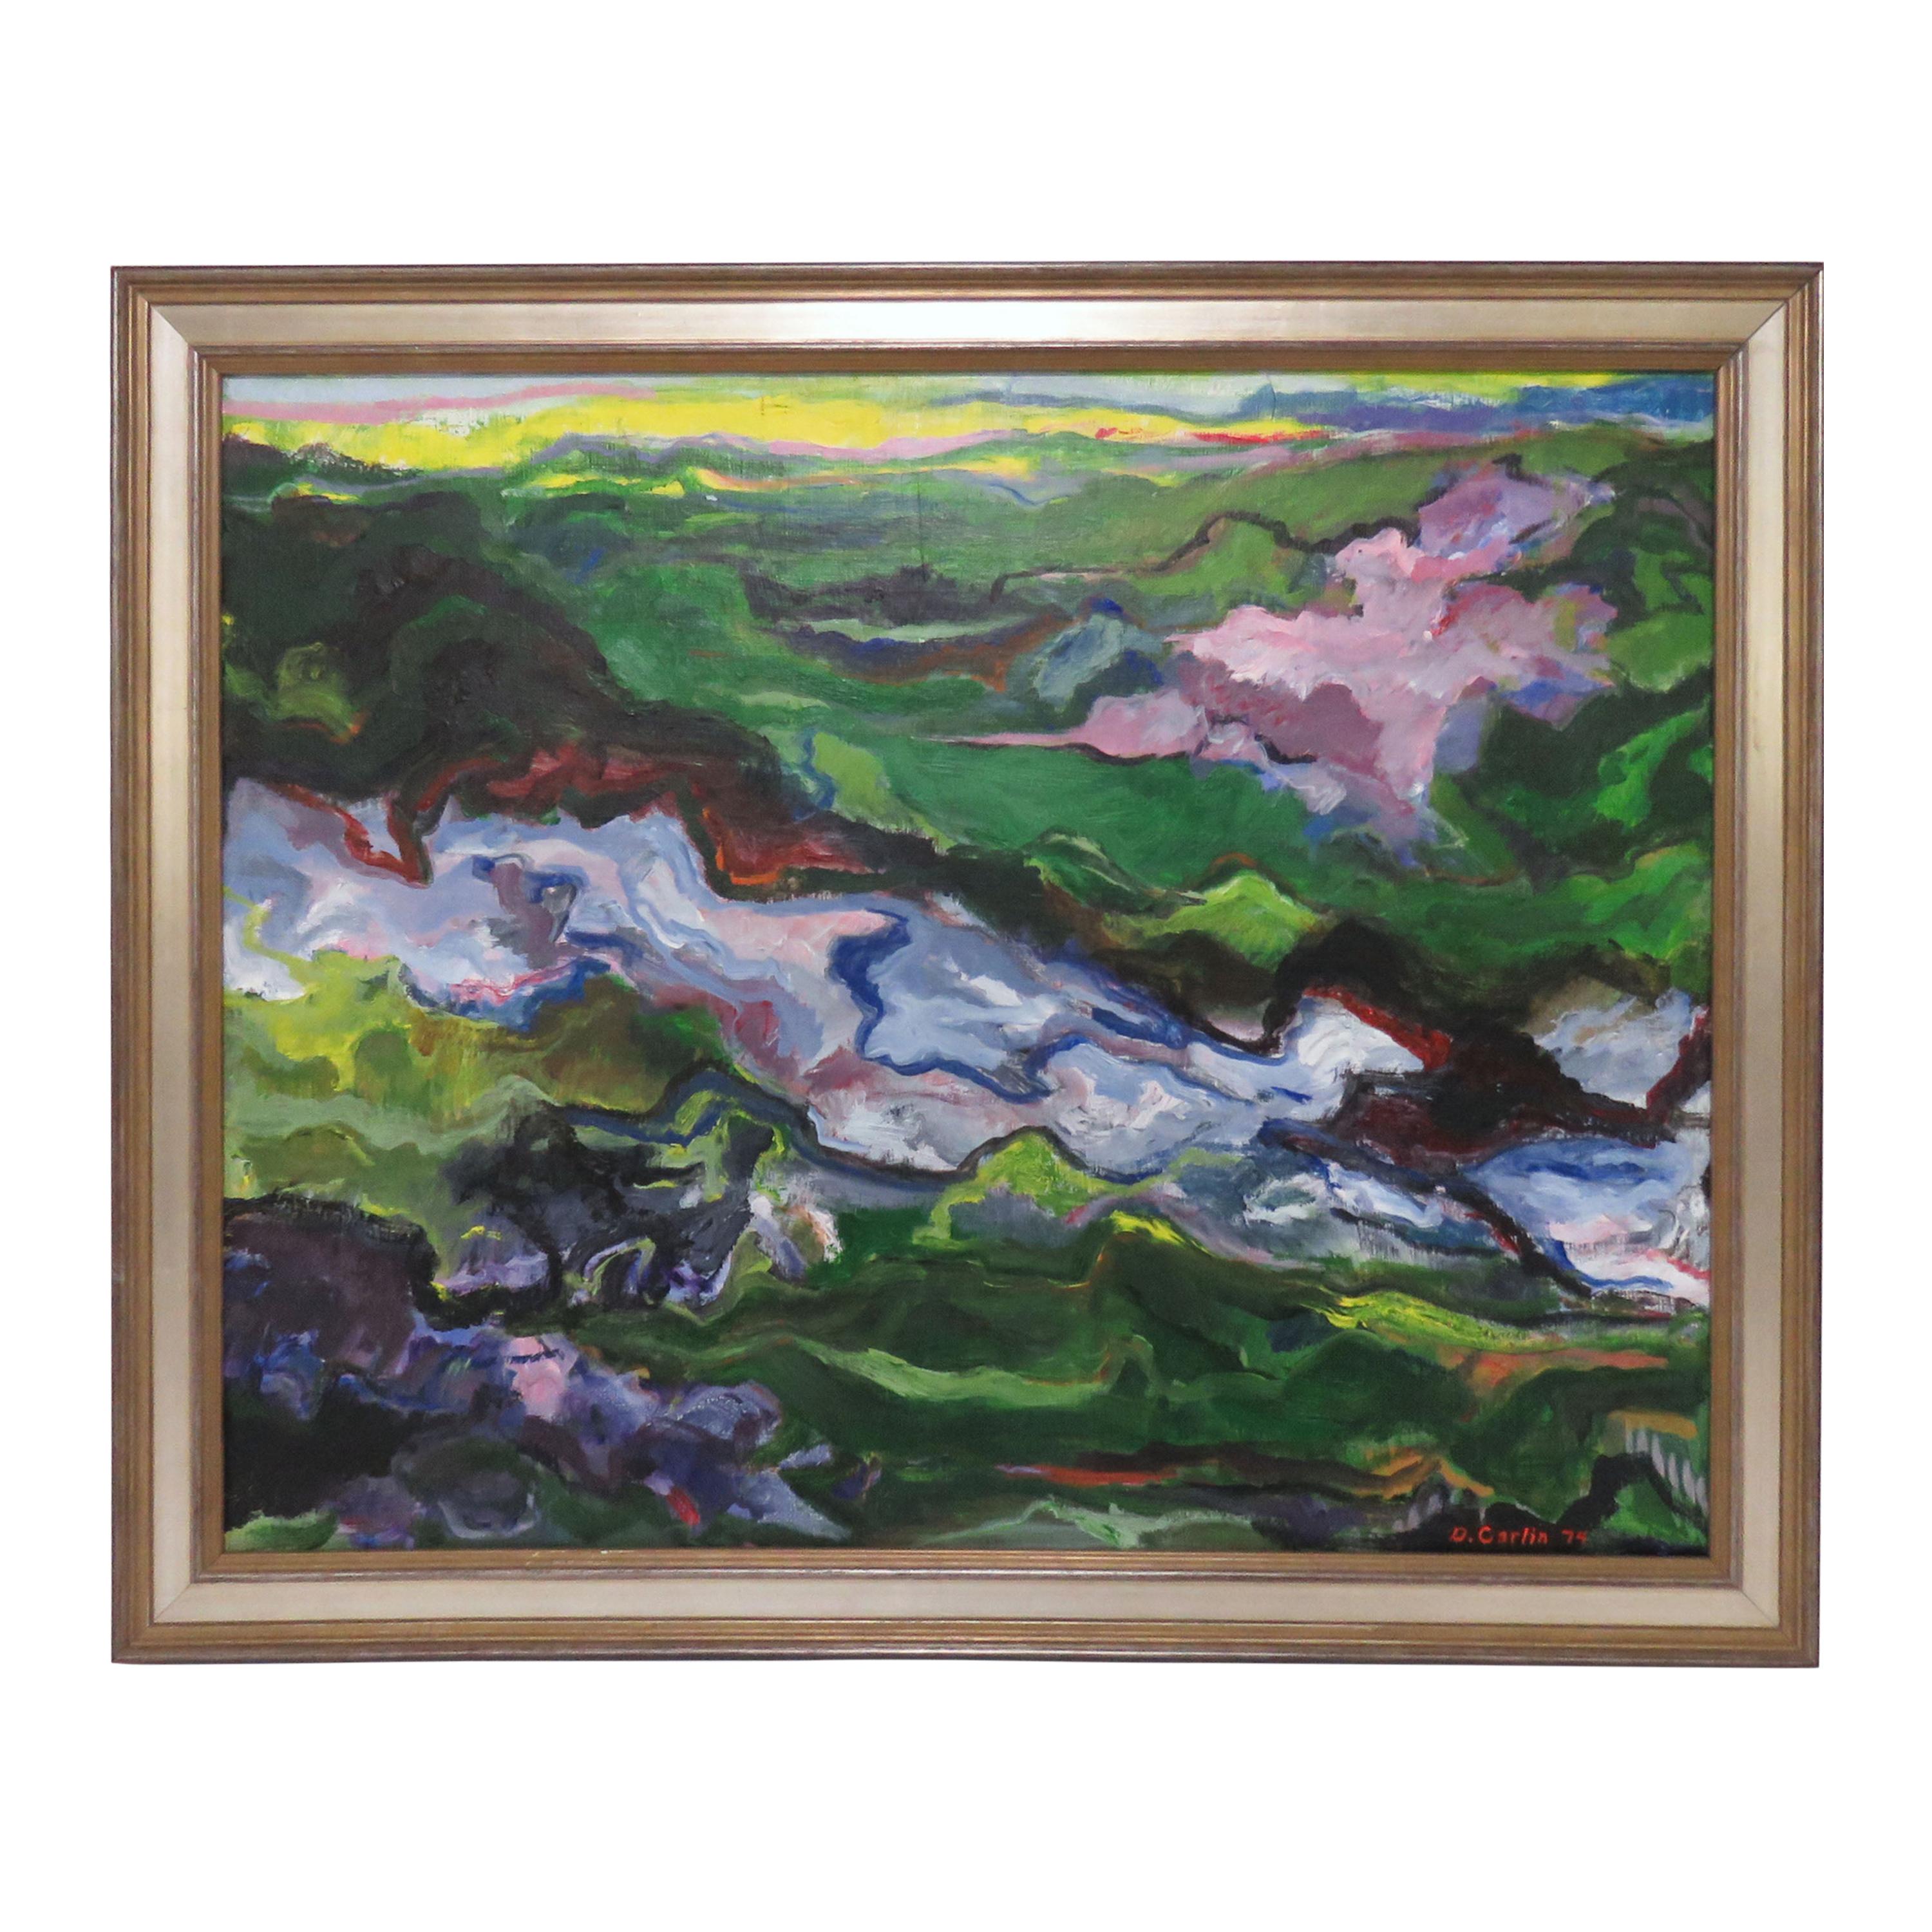 Modernist Abstract Landscape in the Fauvist Style, Signed and Dated 1974